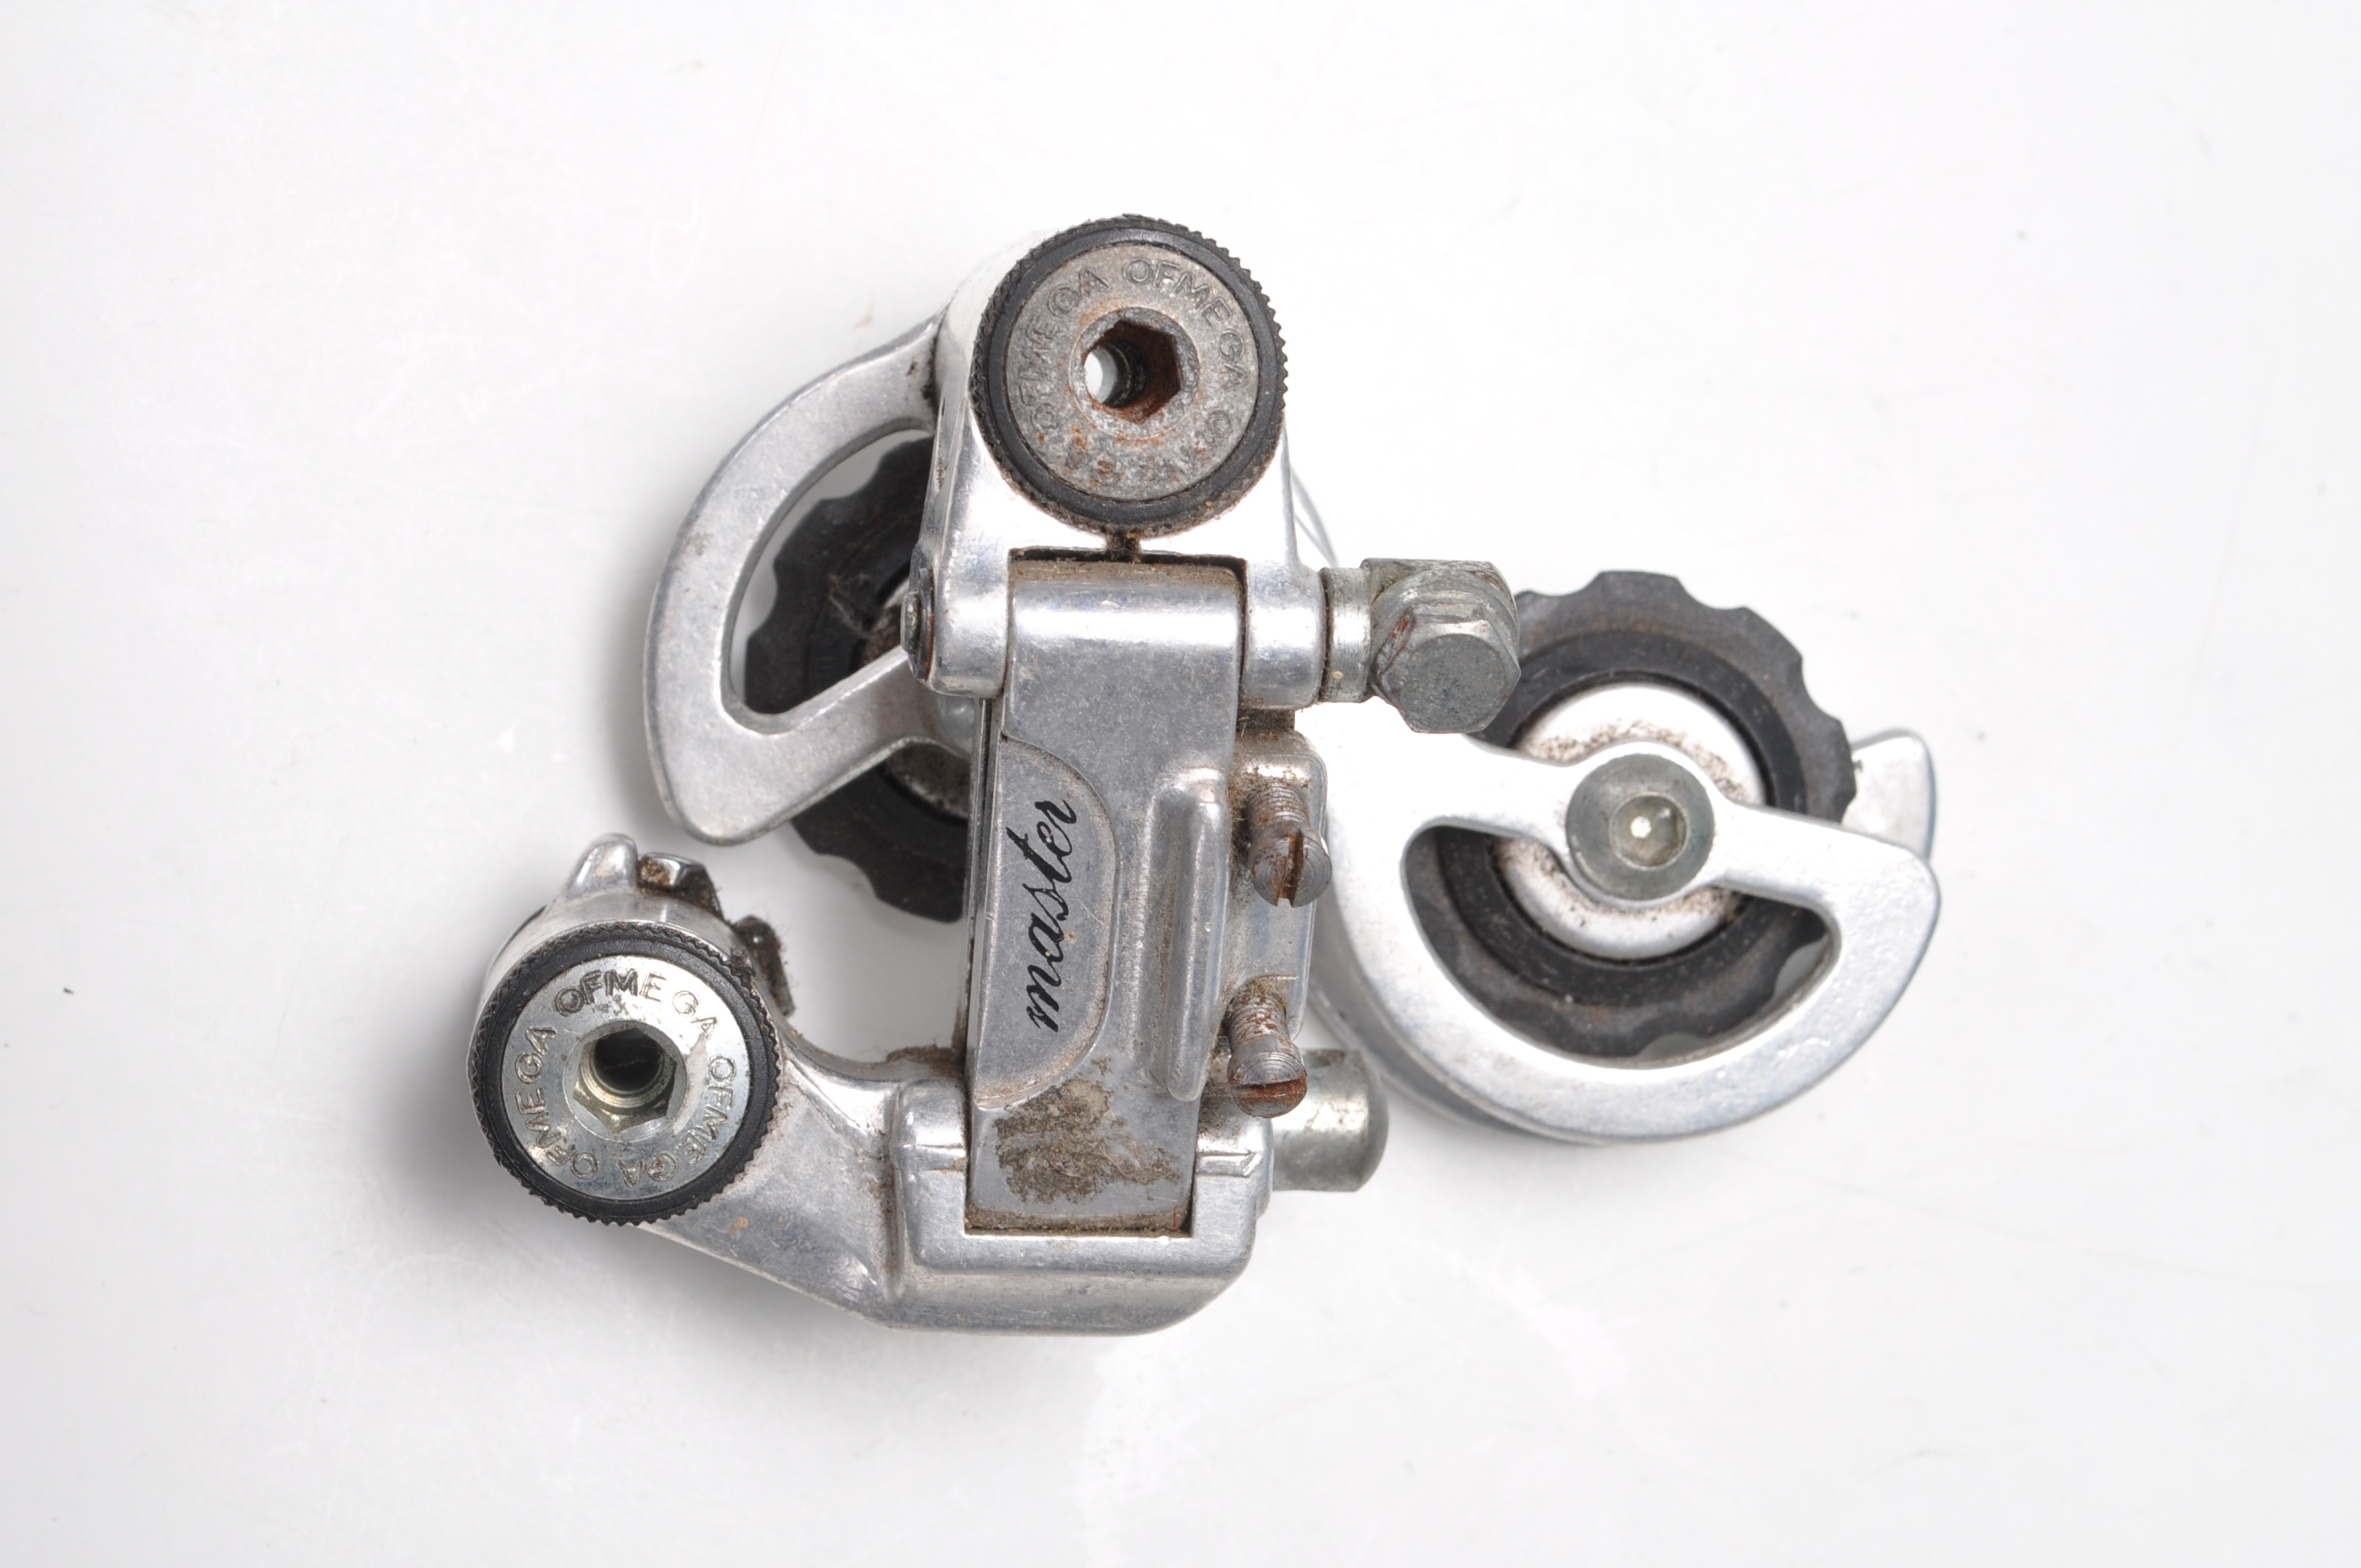 VINTAGE BICYCLES AND SPARES - COLLECTION OF THREADED BIKE HEADSET COMPONENTS. - Image 12 of 20